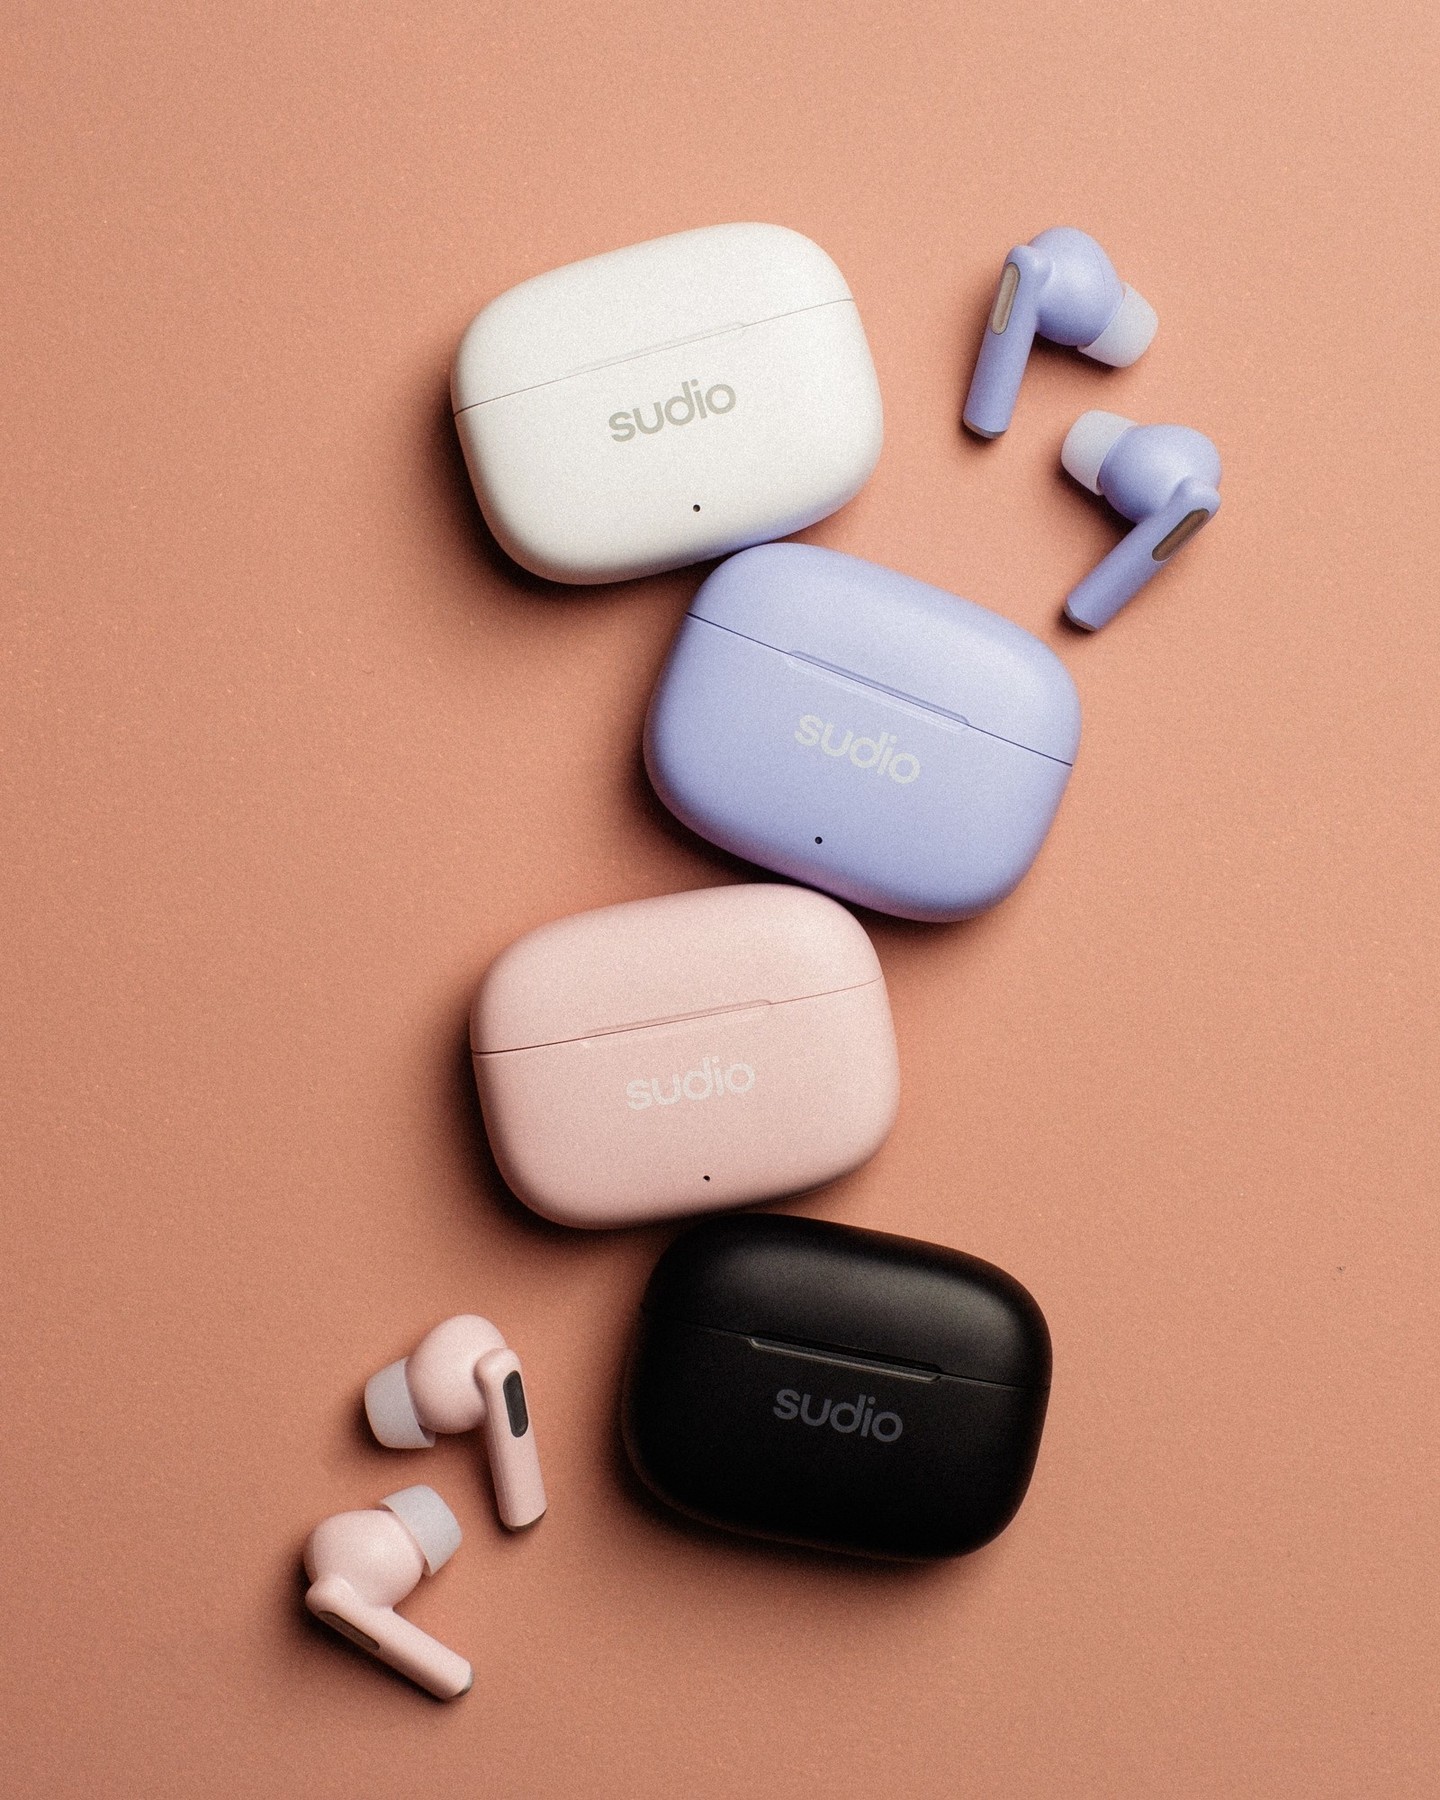 Add some color to your OOTD with these cute earbuds to make your day pop!⁠
⁠
#sudio #shapingsound #sprinkles⁠
#A1ProWhite #A1ProPurple #A1ProPink #A1ProBlack #A1ProSand